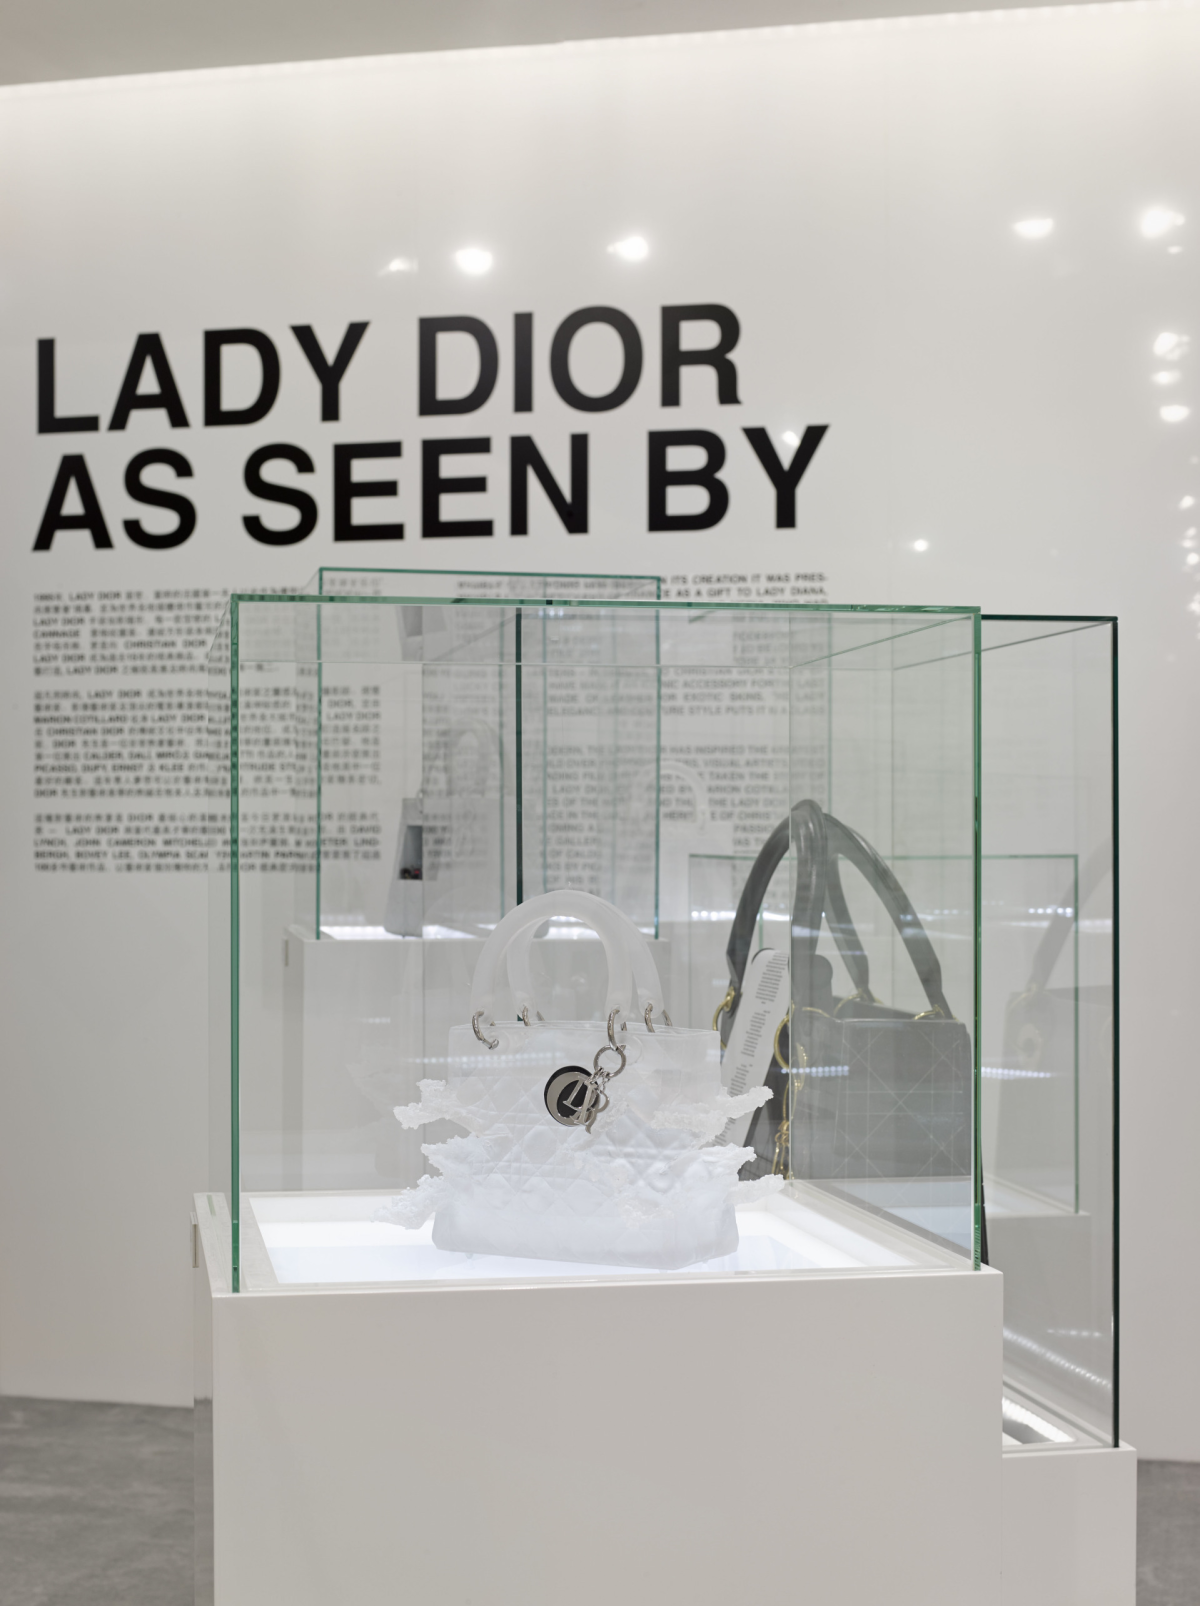 Lady Dior as seen by